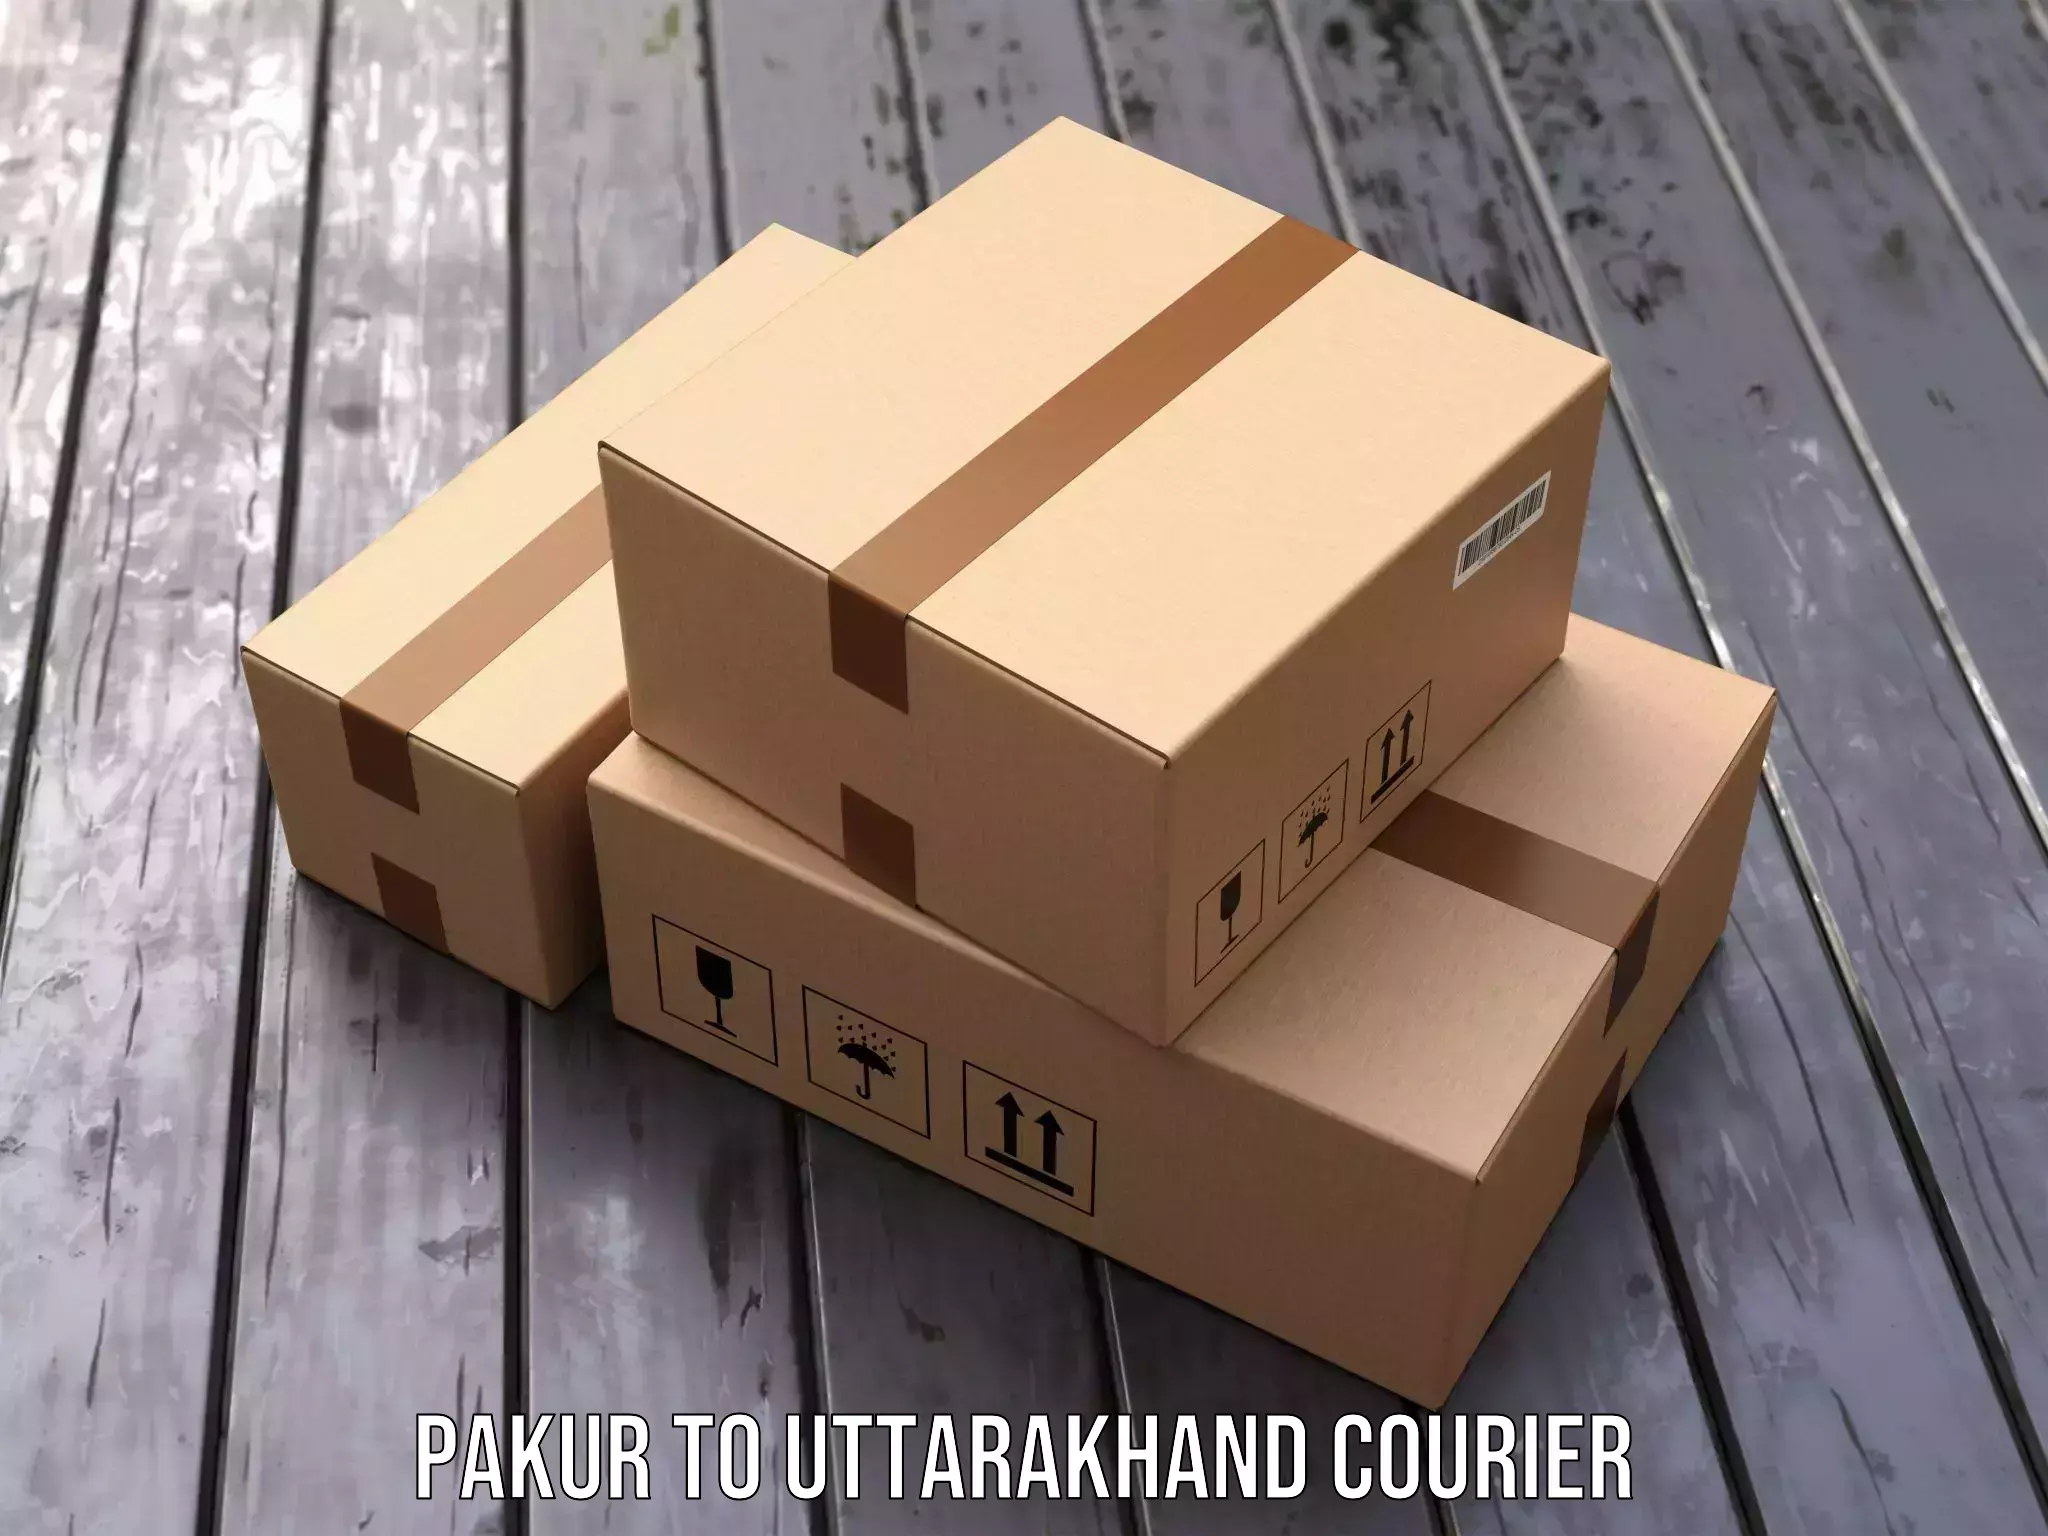 On-call courier service Pakur to Uttarakhand